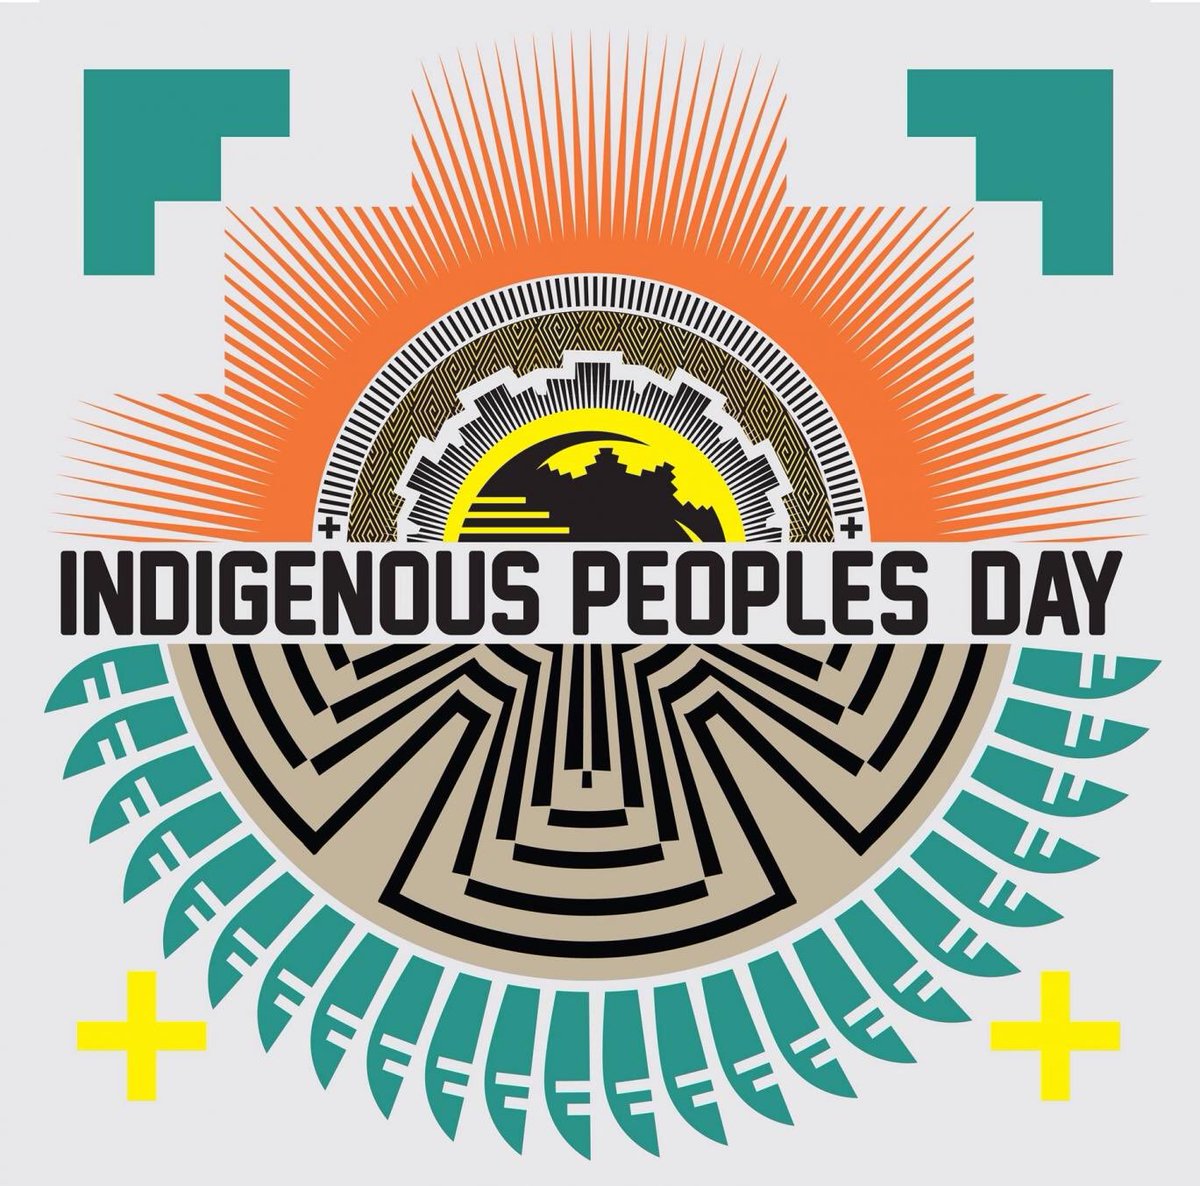 Happy #IndigenousPeoplesDay! We want to recognize the contributions of Montana’s native peoples not just today, but everyday. We call on the Montana State Legislature and @GovernorBullock to replace Columbus Day with Indigenous Peoples Day! #DecolonizeHistory